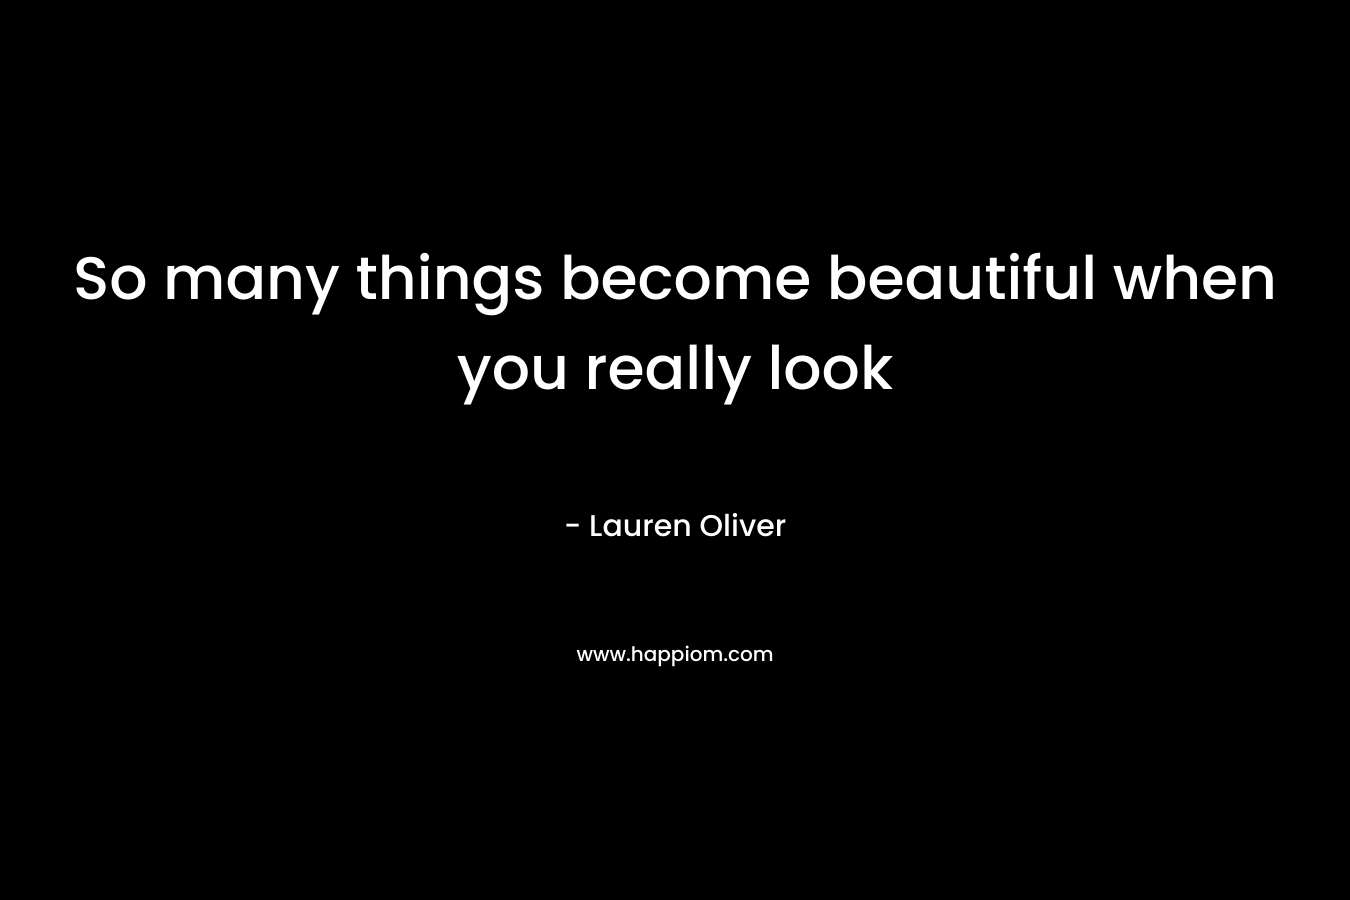 So many things become beautiful when you really look – Lauren Oliver